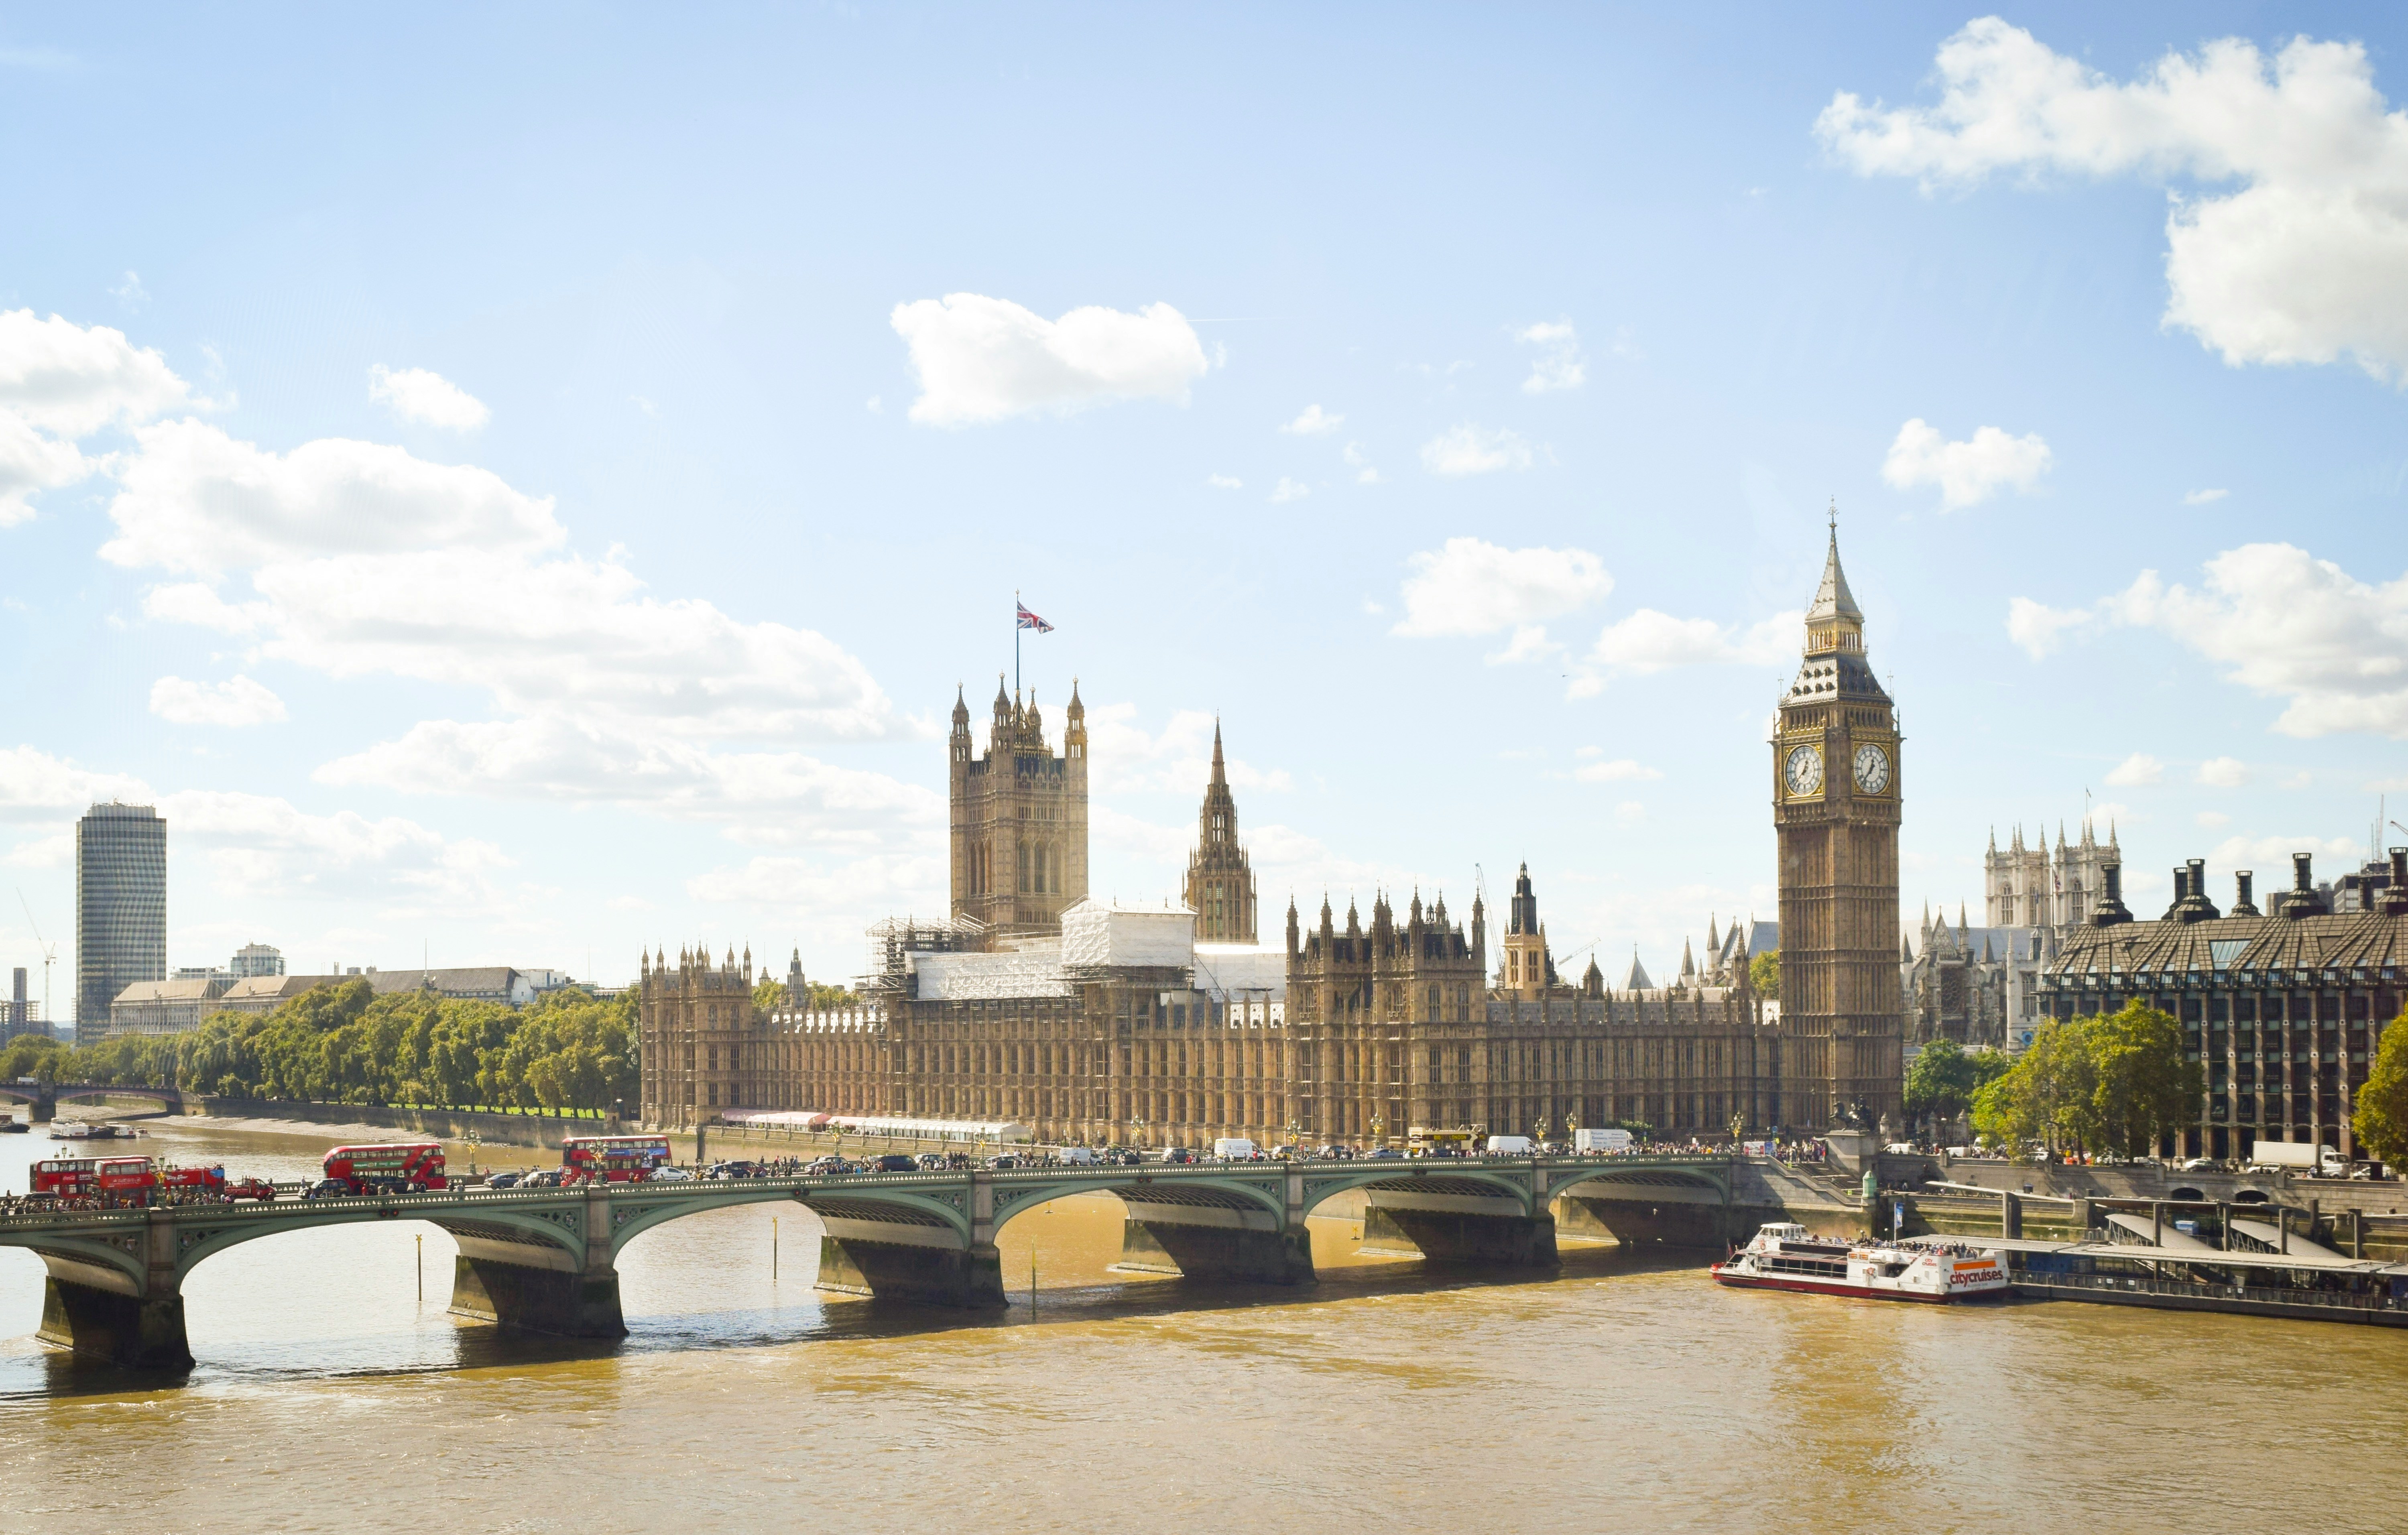 The palace of Westminster and London Bridge 